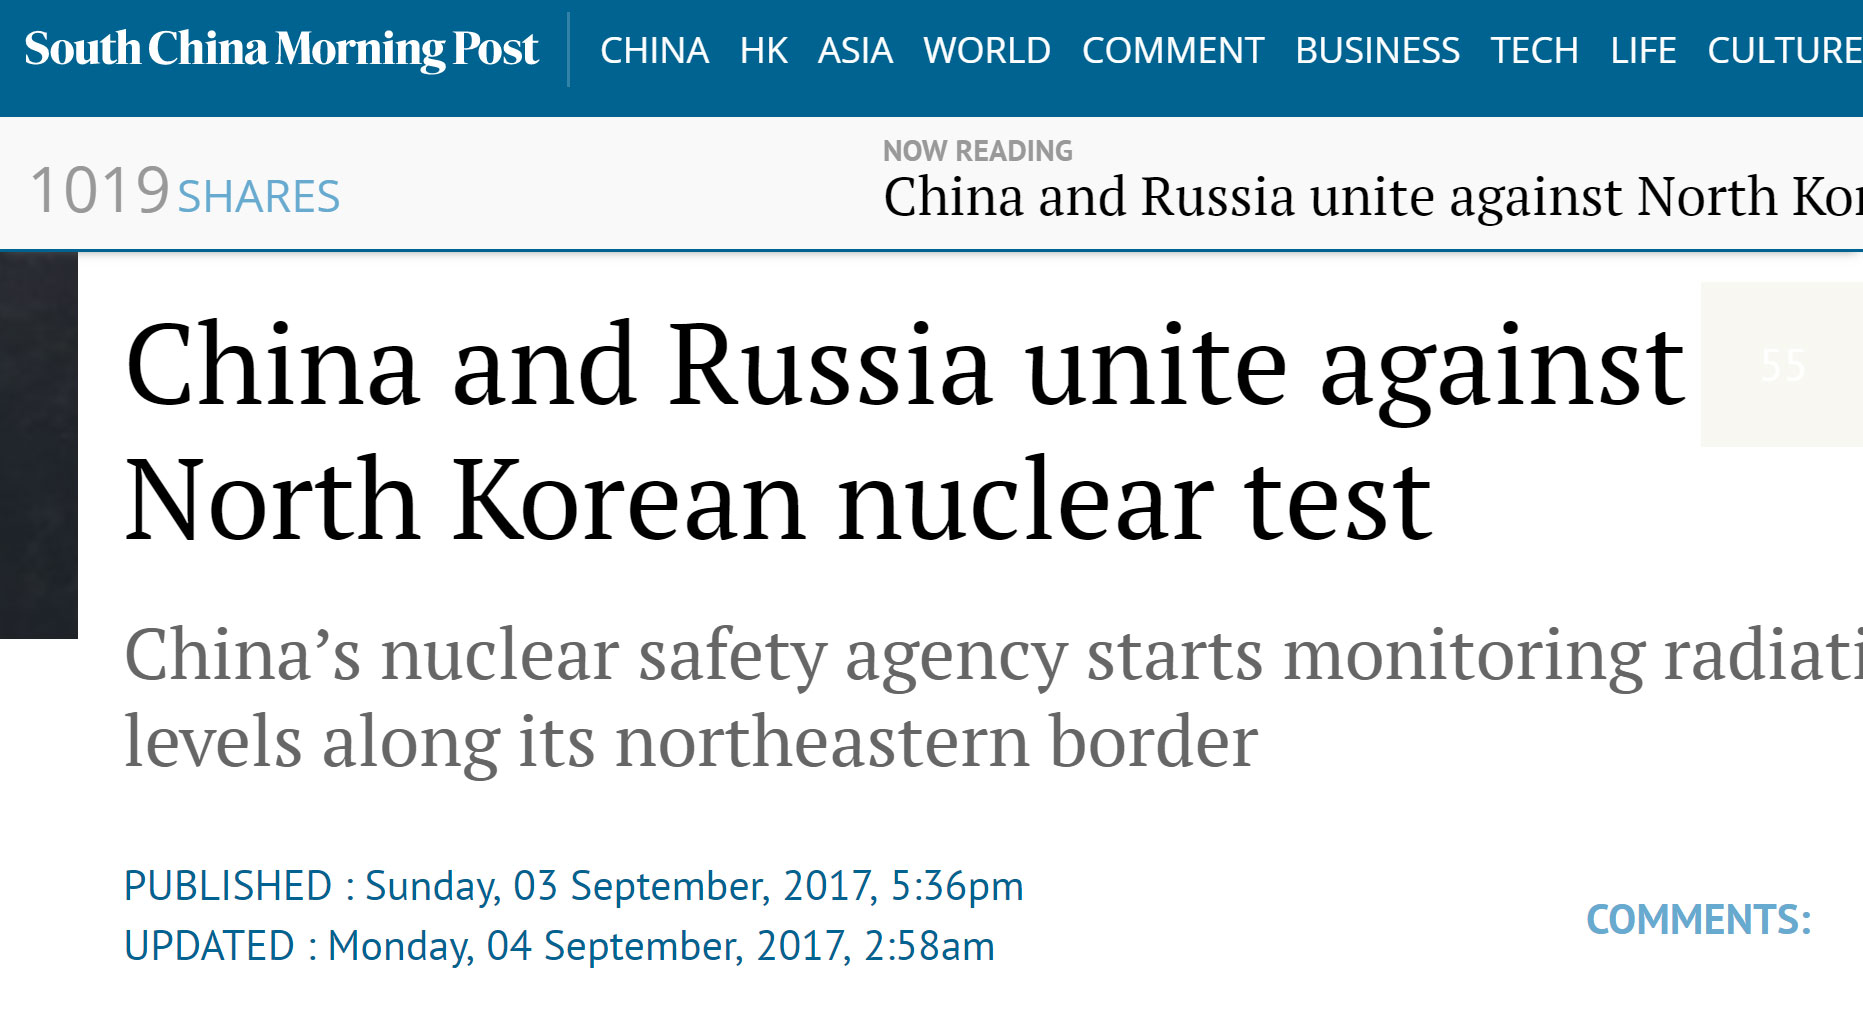 7-China-and-Russia-unite-against-North-Korean-nuclear-test.jpg